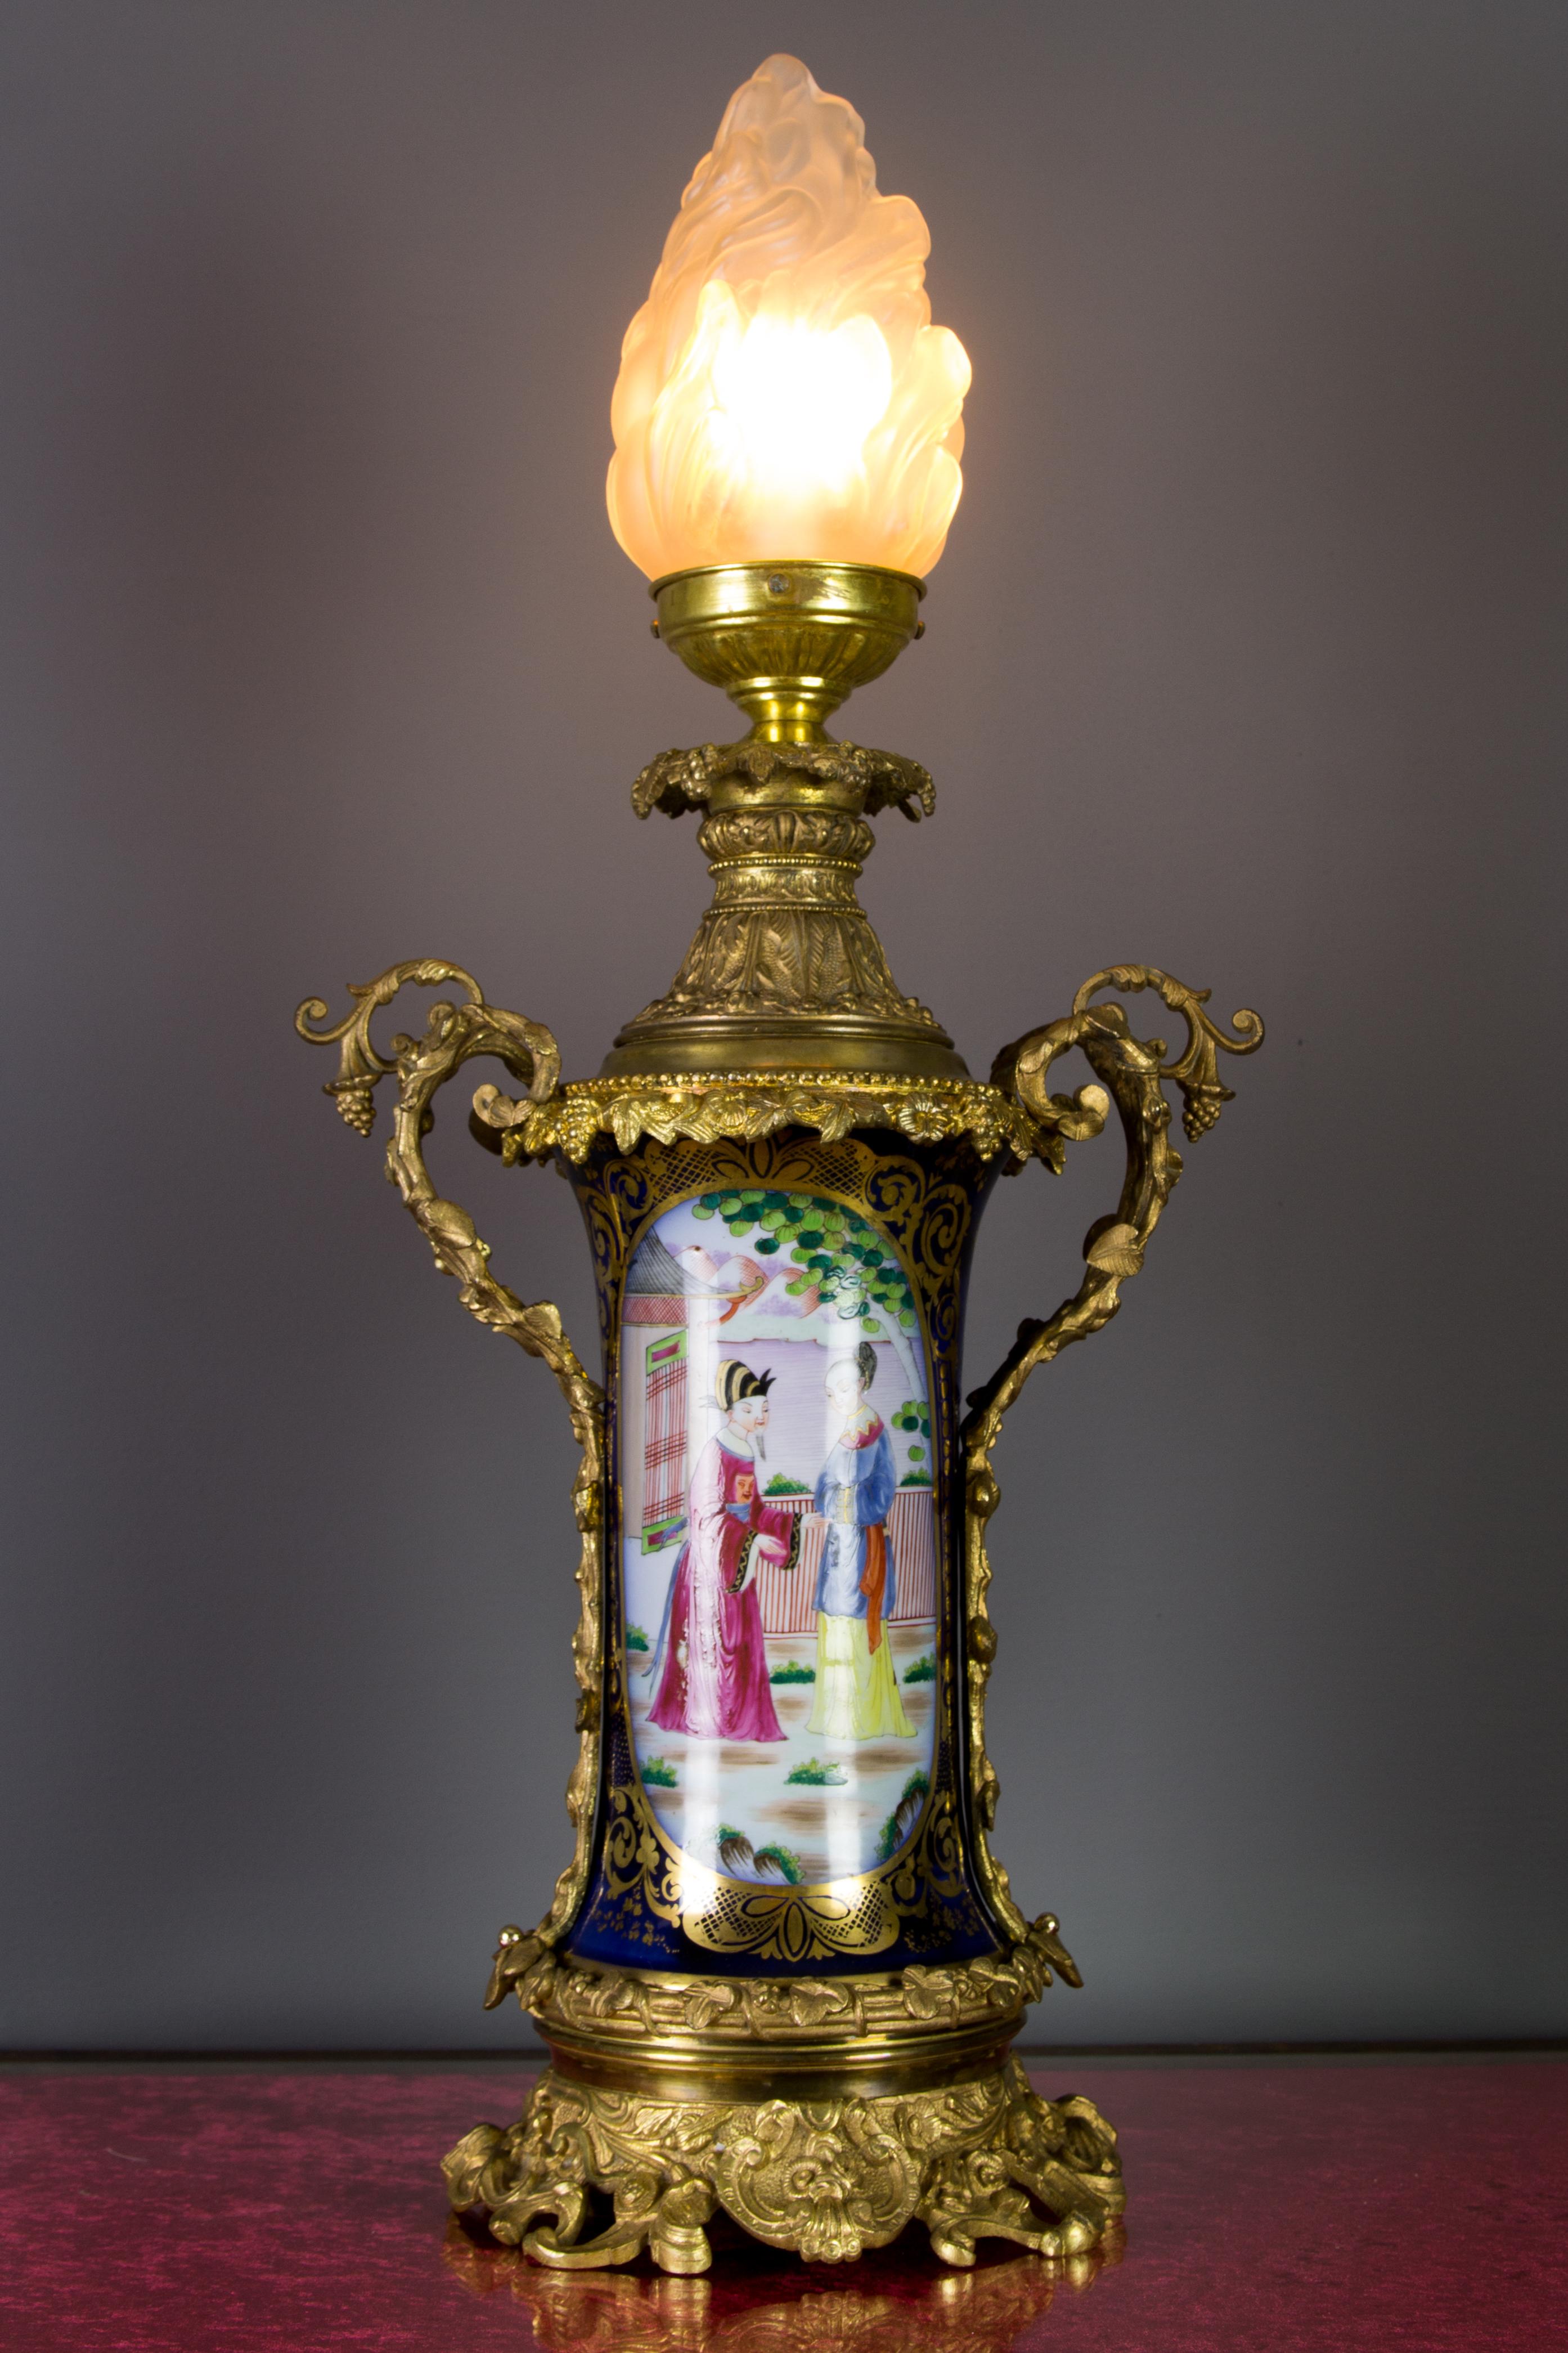 This amazing and large late 19th-century oil lamp mounted on a gilt bronze base and fitted with bronze cap and handles, features a cobalt blue and hand-painted porcelain body with Chinoiserie style colorful scenes. Ornate gilt bronze details in